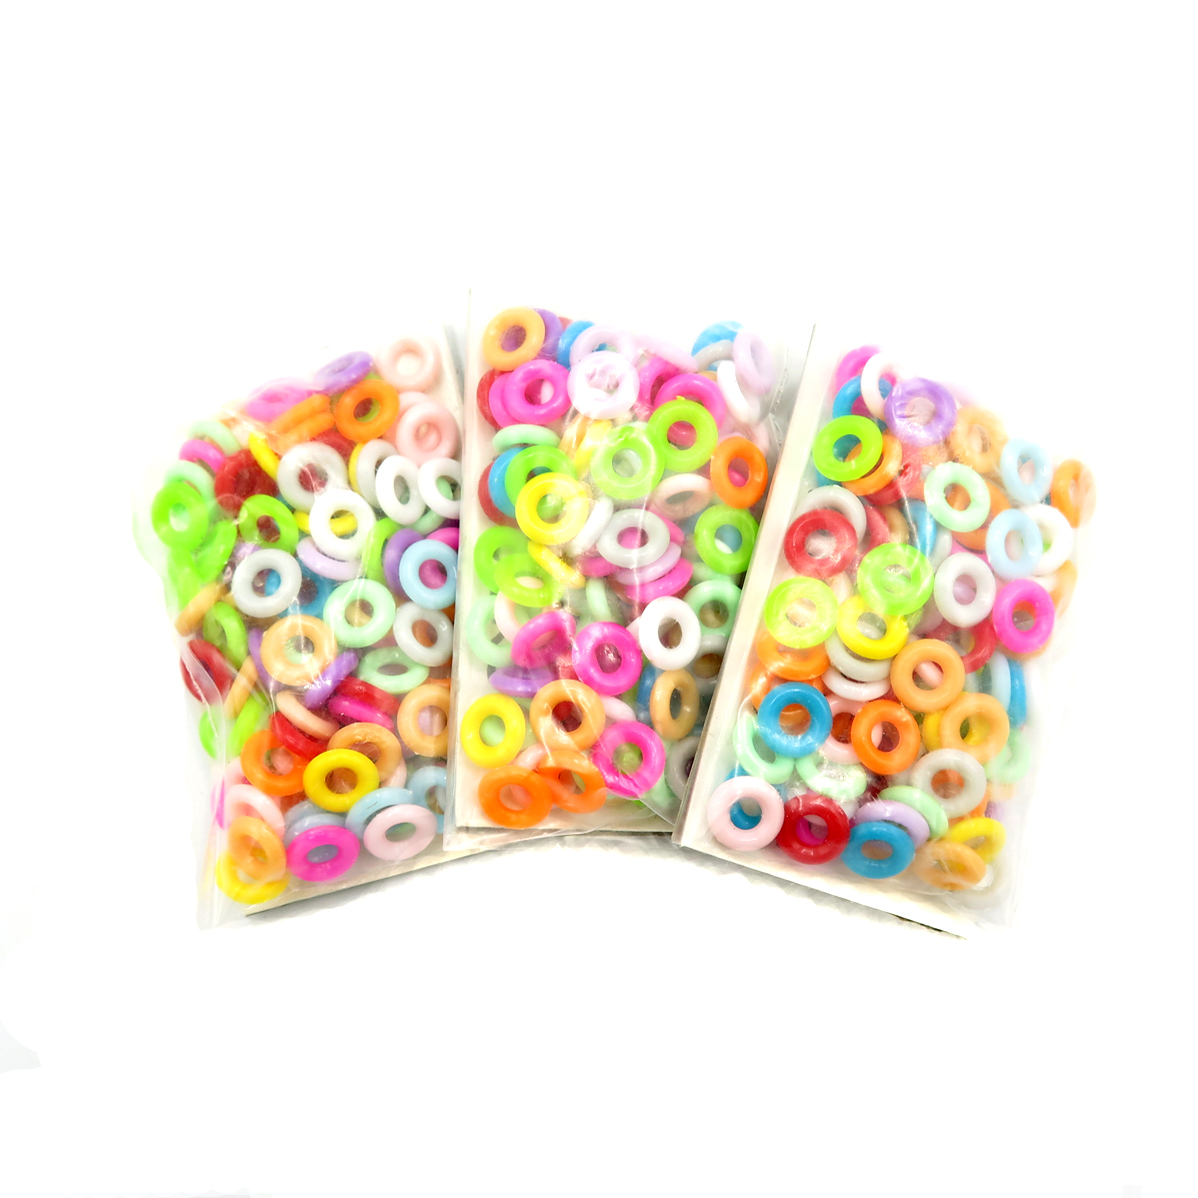 ABOOFAN Donut Resin Charms Slices Flatback Buttons Cute Charms Beads for  Handicraft Accessories Scrapbooking Phone Case Decor Jewelry Making Light  Green 